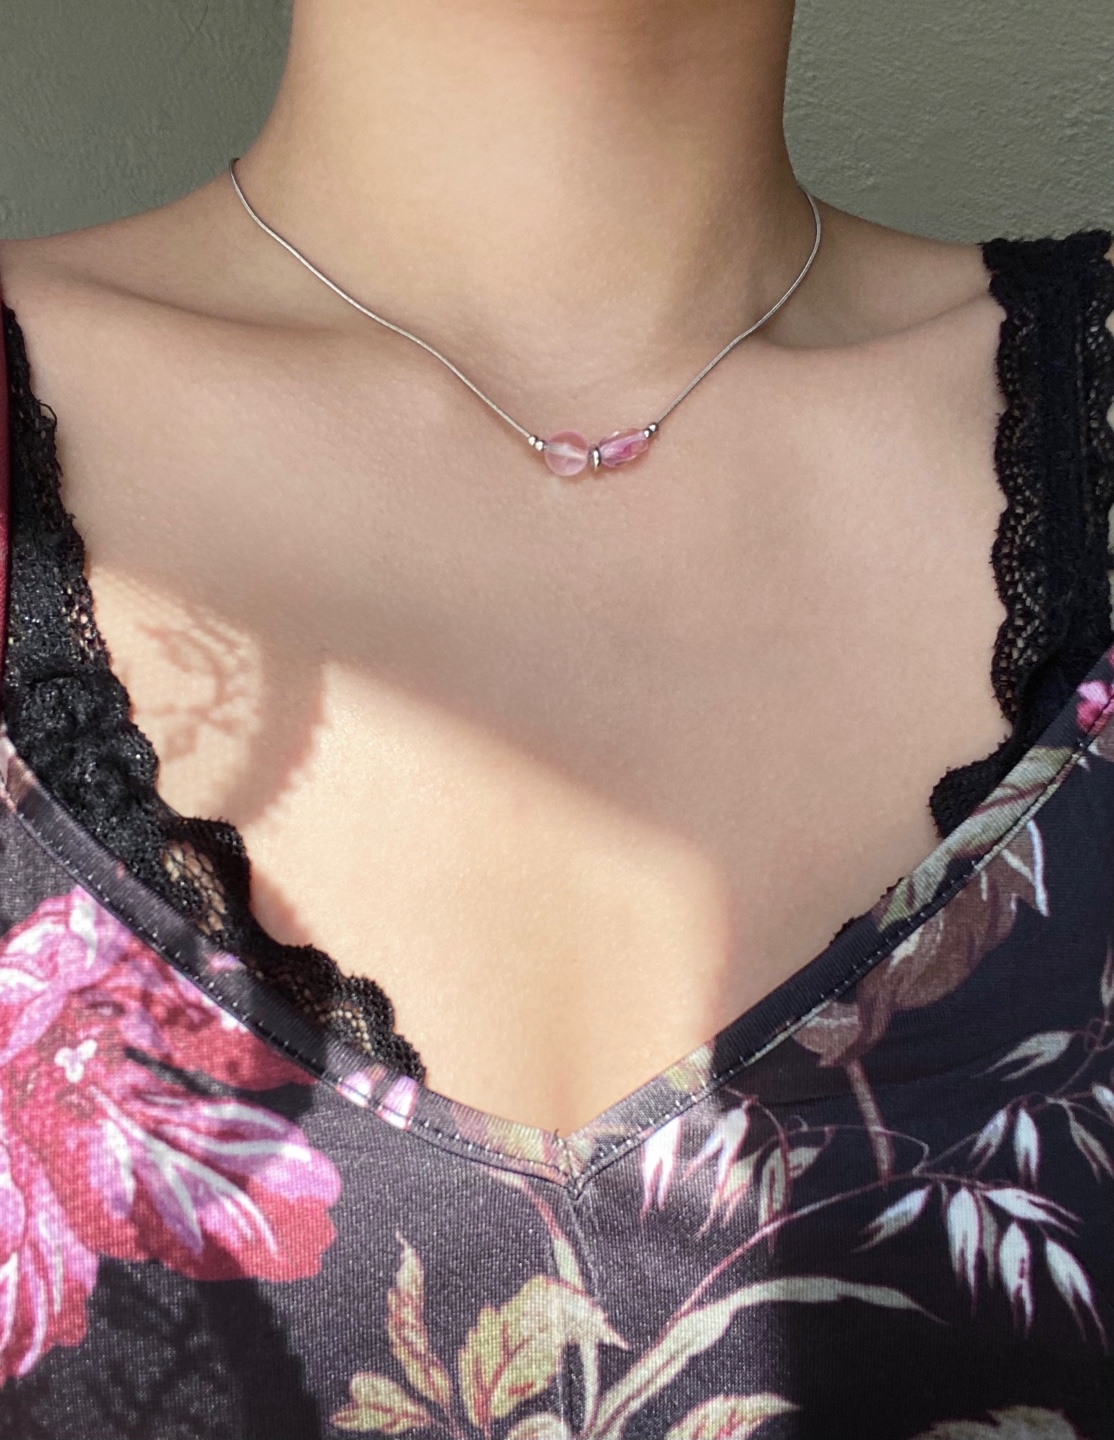 [Made outsquare] Rose blossoming necklace